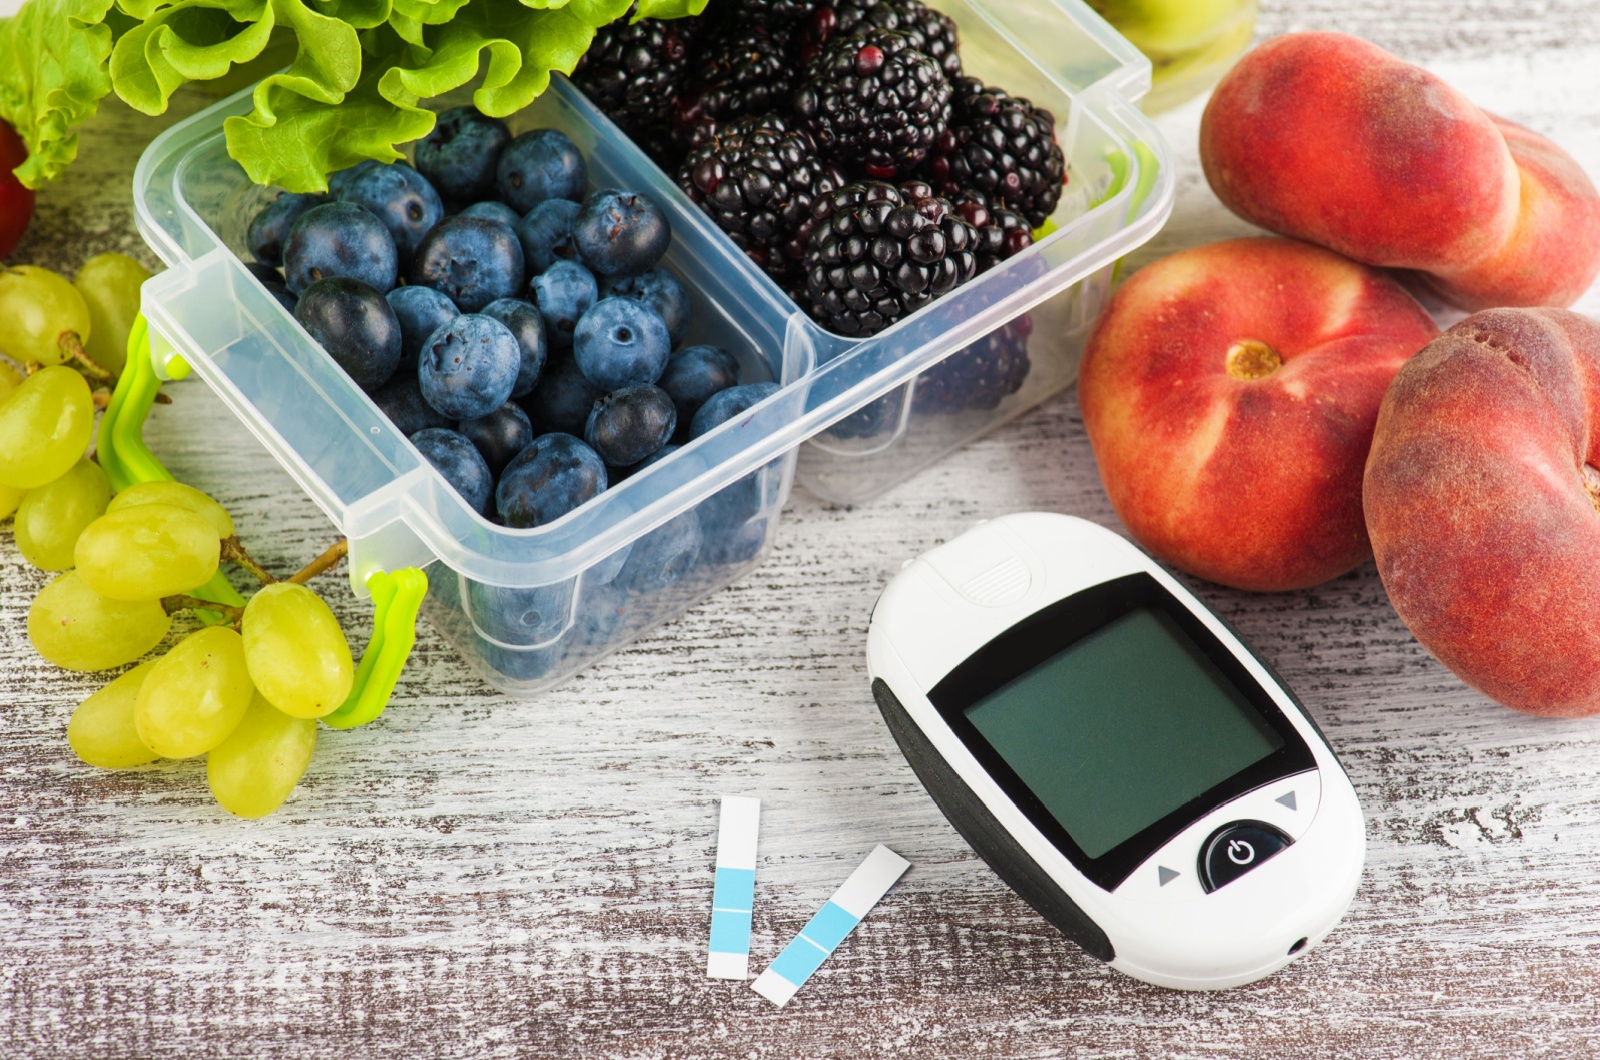 Blood glucose meter, berries and fruits